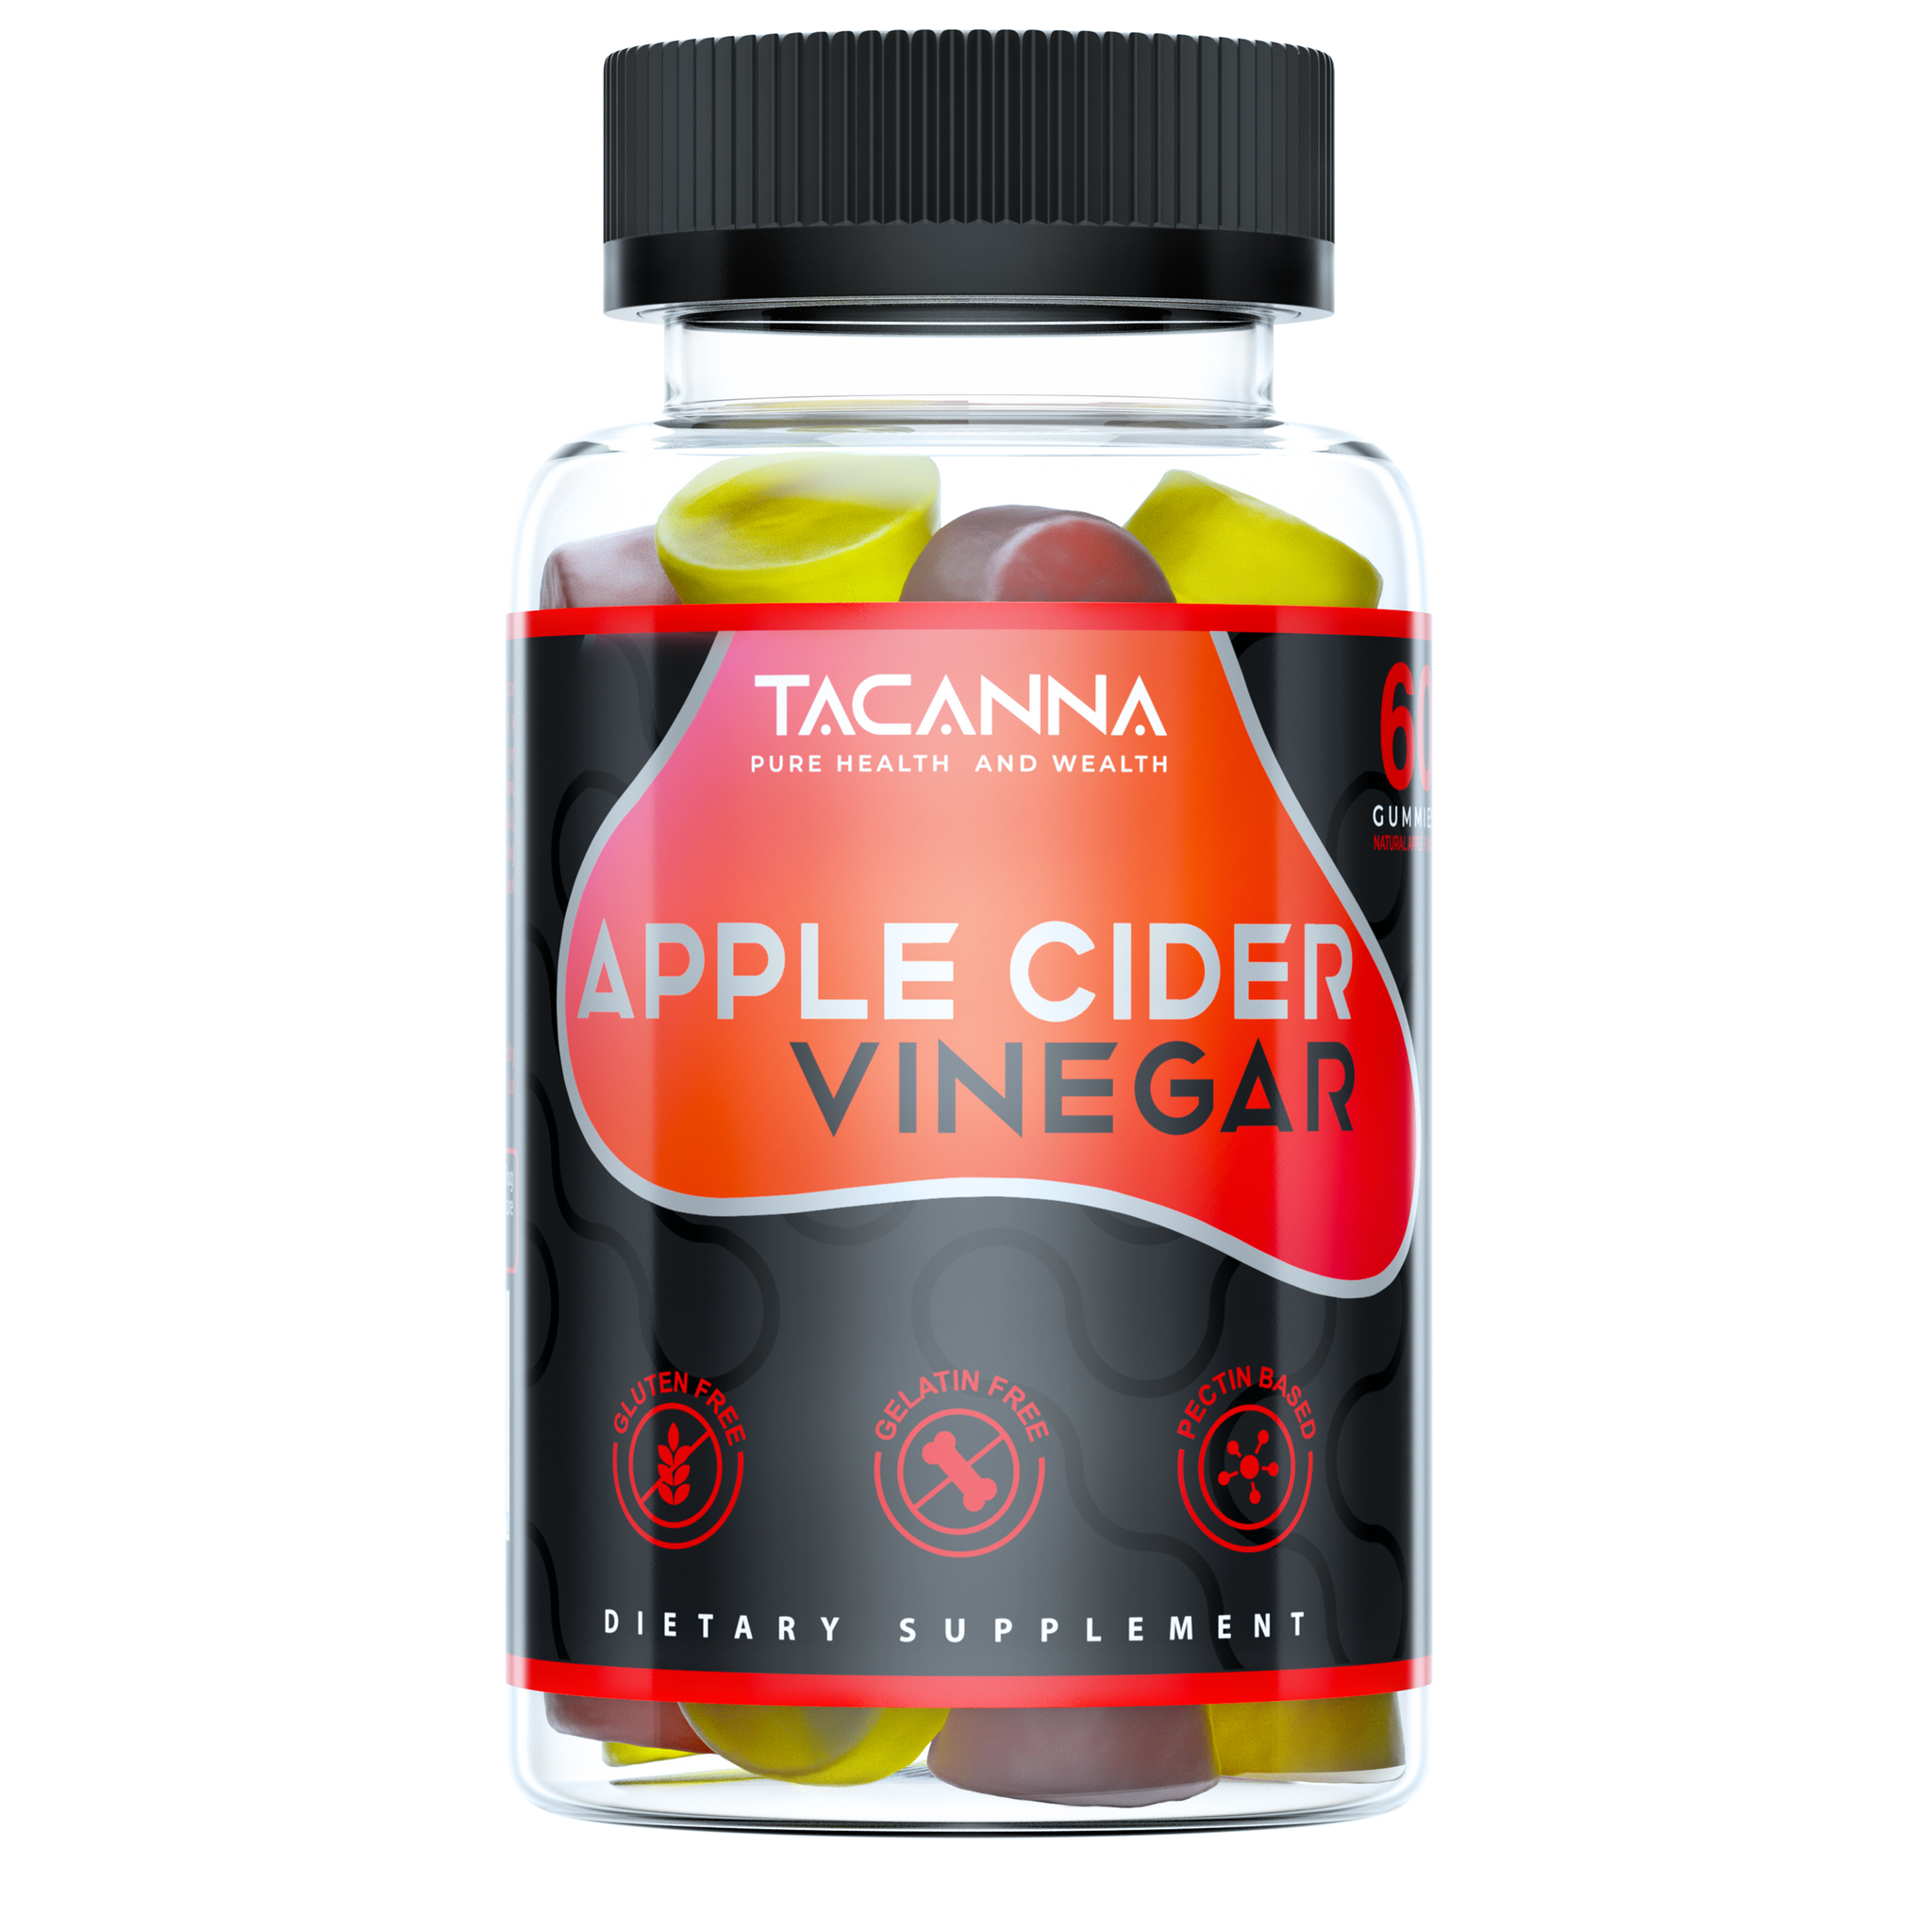 Apple Cider Vinegar Gummies All-Natural - 60 Count, Organic, Gluten-Free, Non-GMO - Promotes Fat Burning Weight Loss, Gentle Colon Detox and Cleanse Women, Men, and Kids